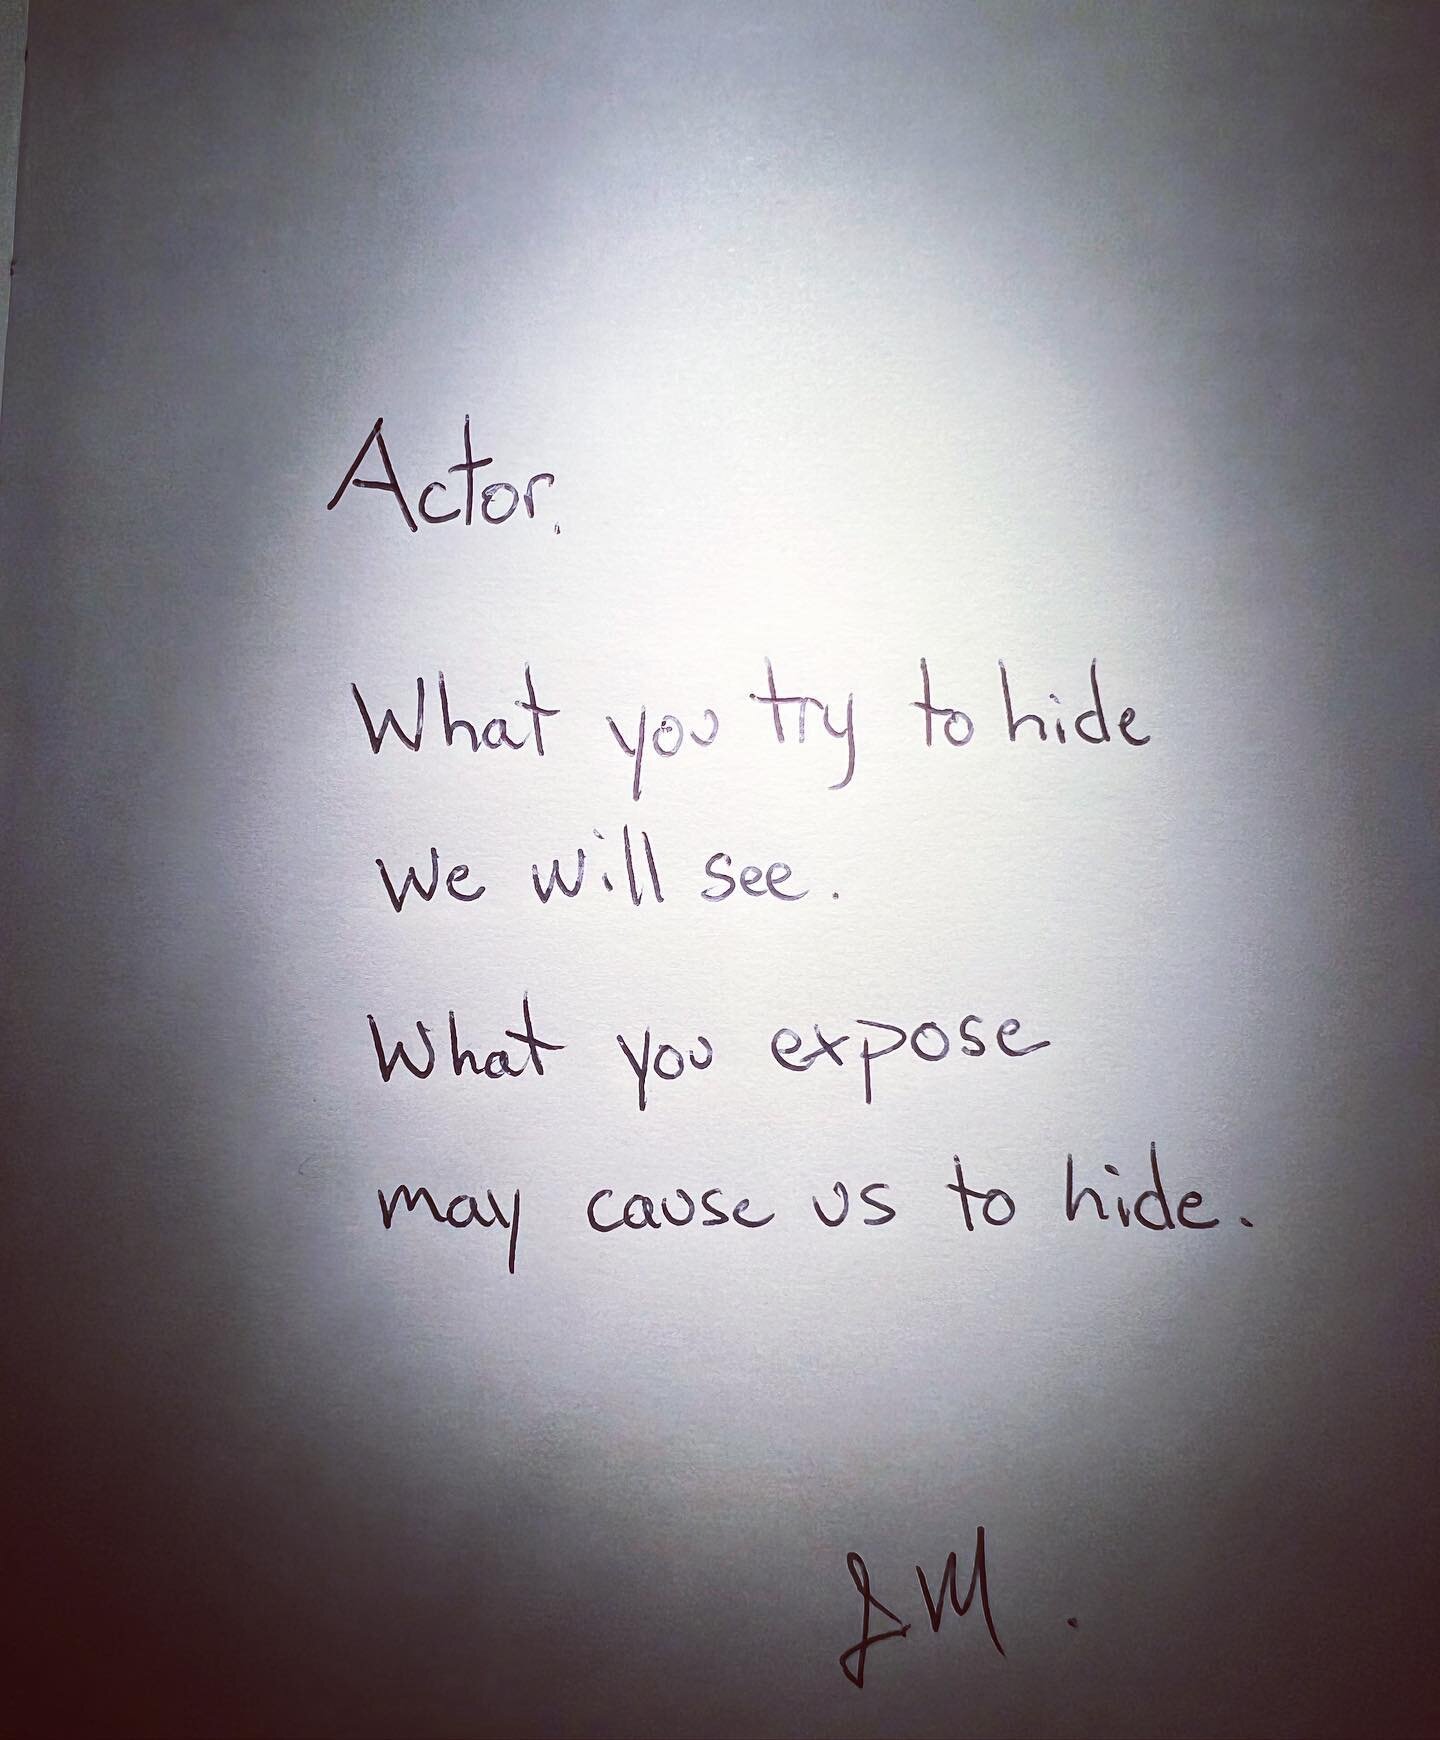 Actor your craft has magic effects when you surrender to being in a continual state of revealing. The secret buried within you seek along side the audience, peeling the onion through tears of fear and hope. Acting is the craft of experiencing the fir